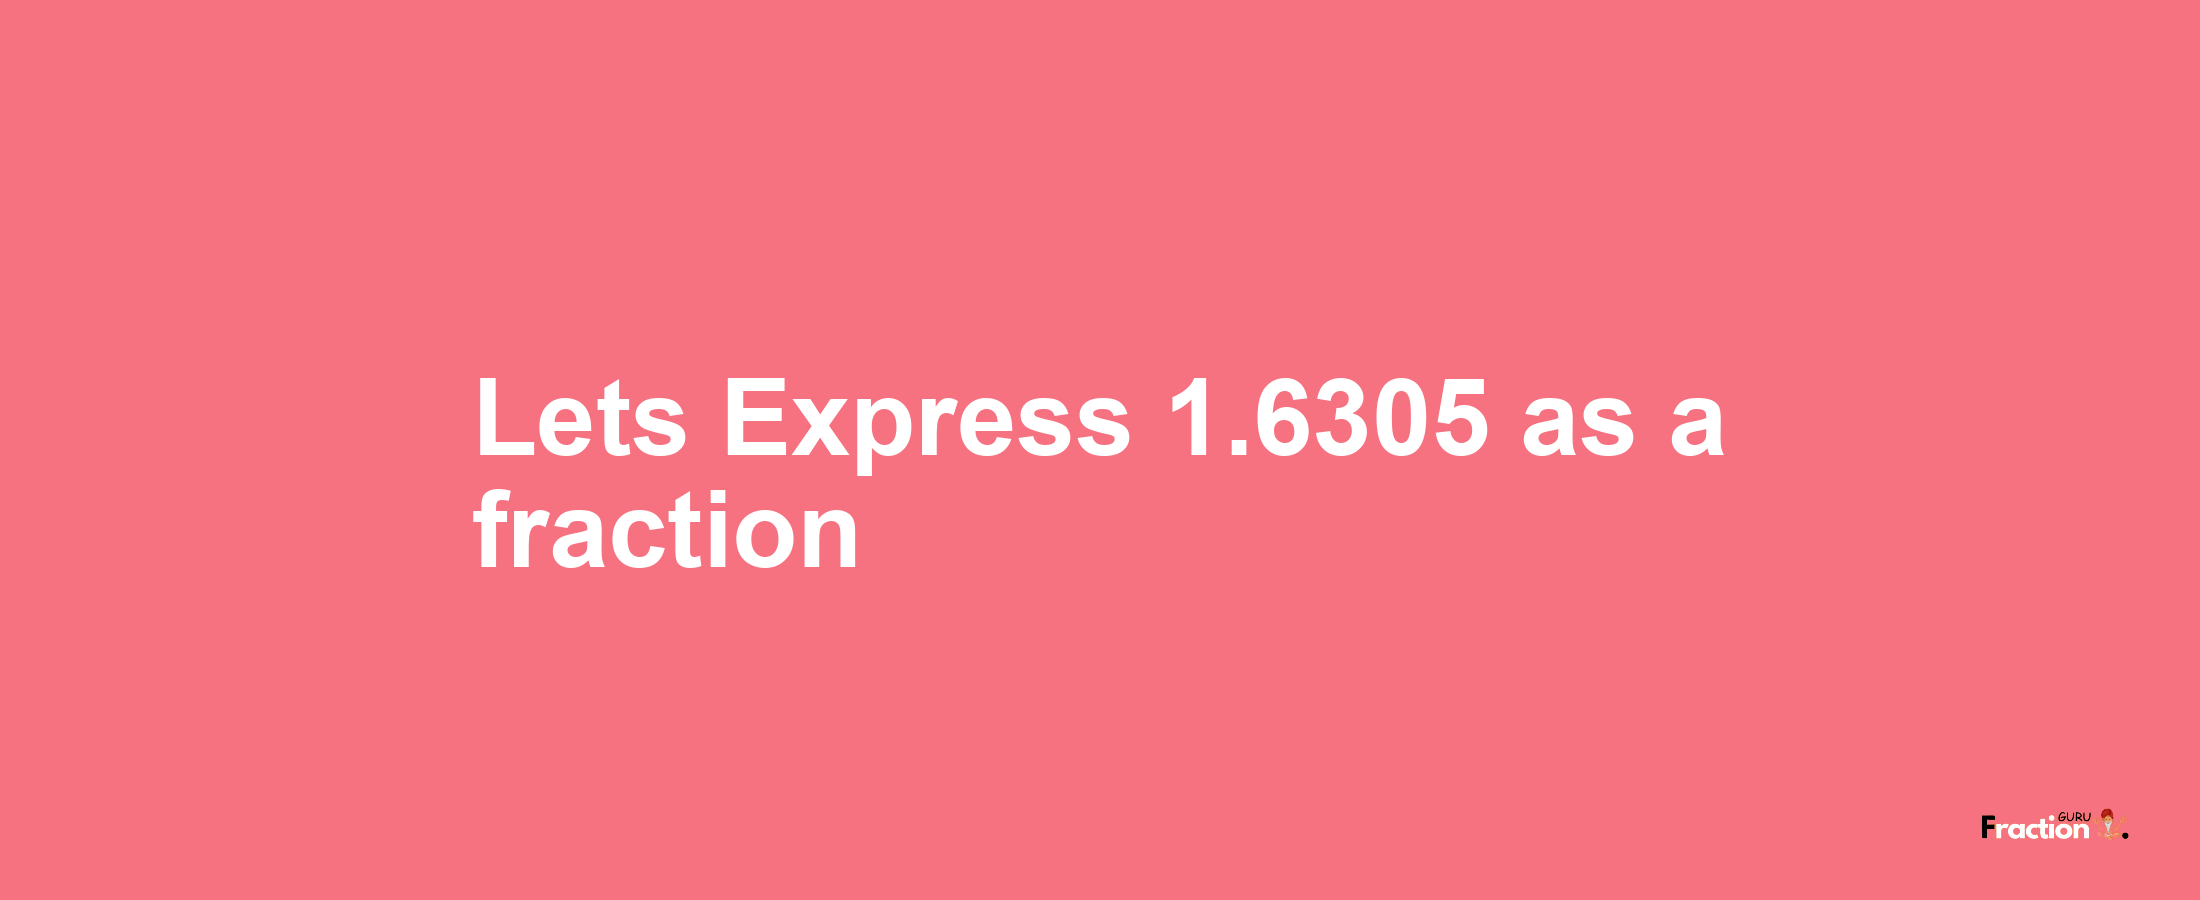 Lets Express 1.6305 as afraction